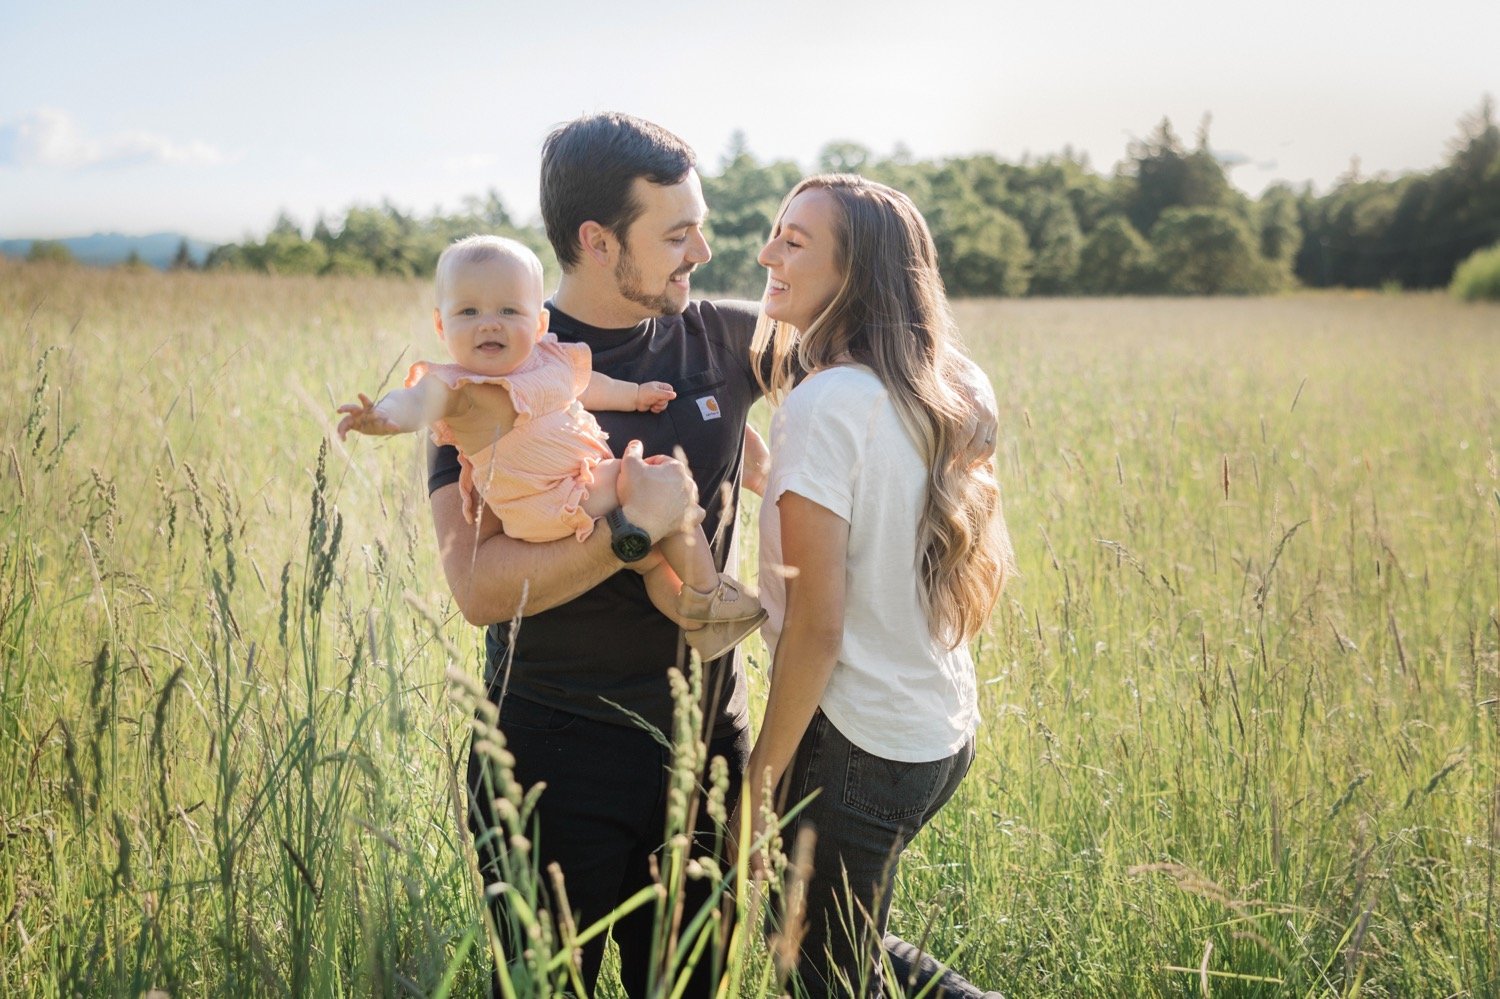 01_Portland Family Photo Session9_Woman in white shirt and man in black shirt hold baby in pink dress while standing in grassy field.jpg